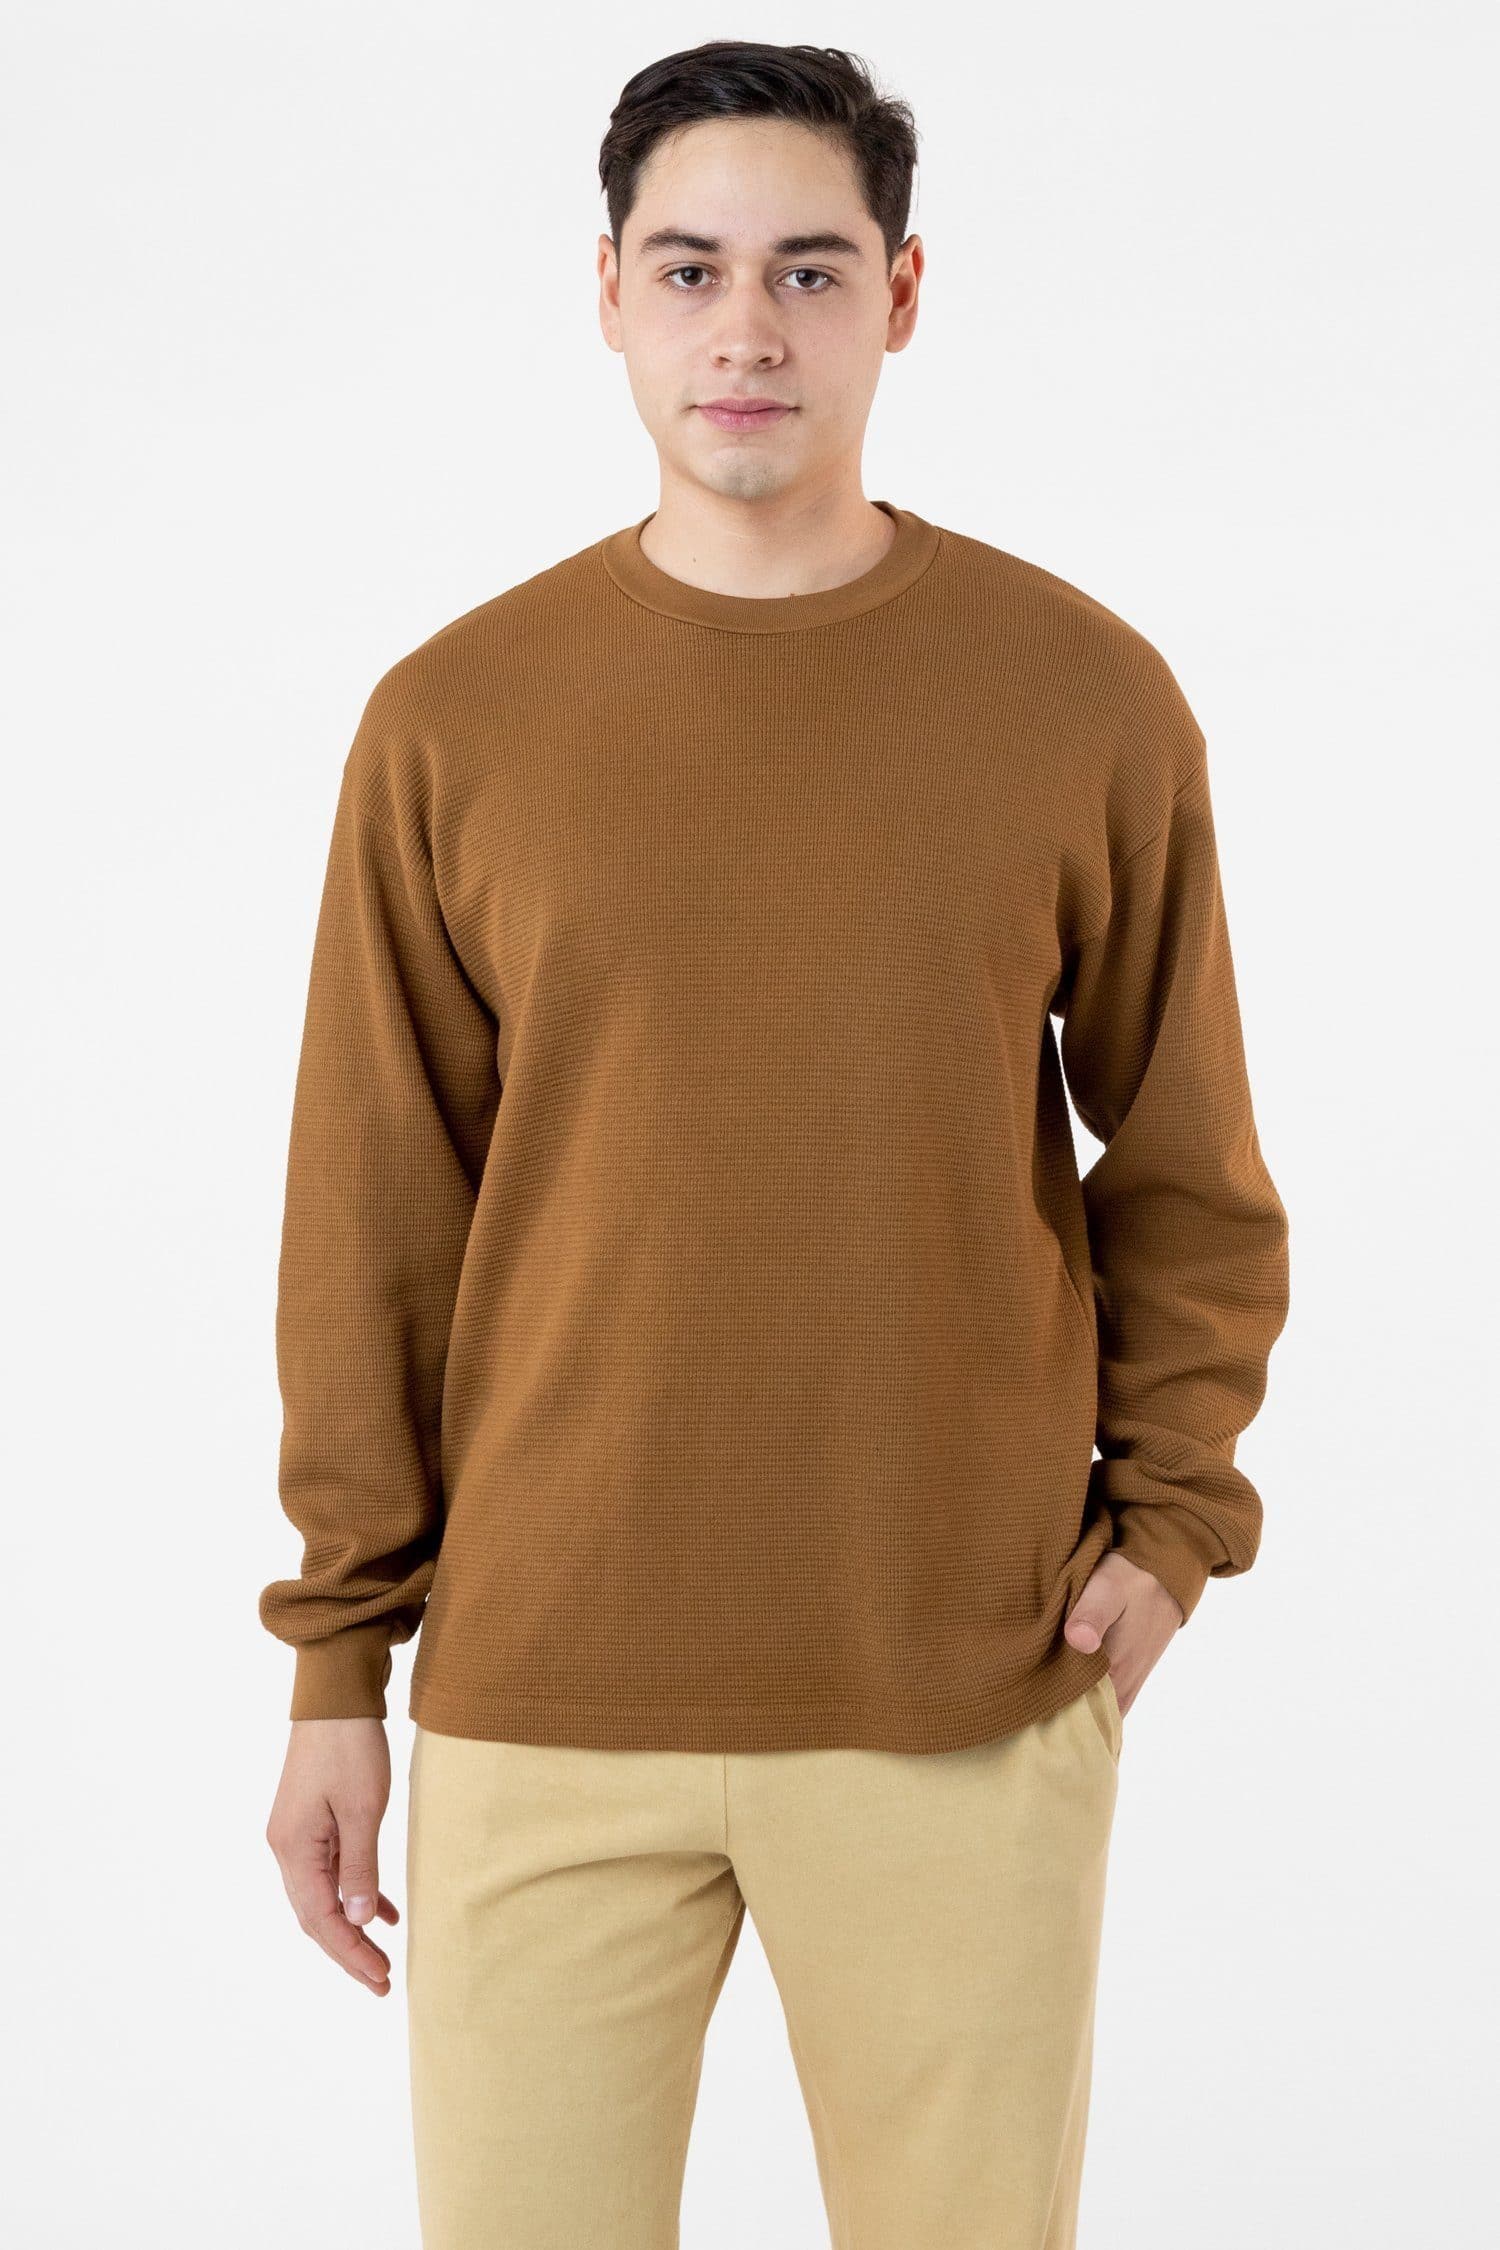 TX407GD - Long Sleeve Heavy Thermal Crew Neck – Los Angeles